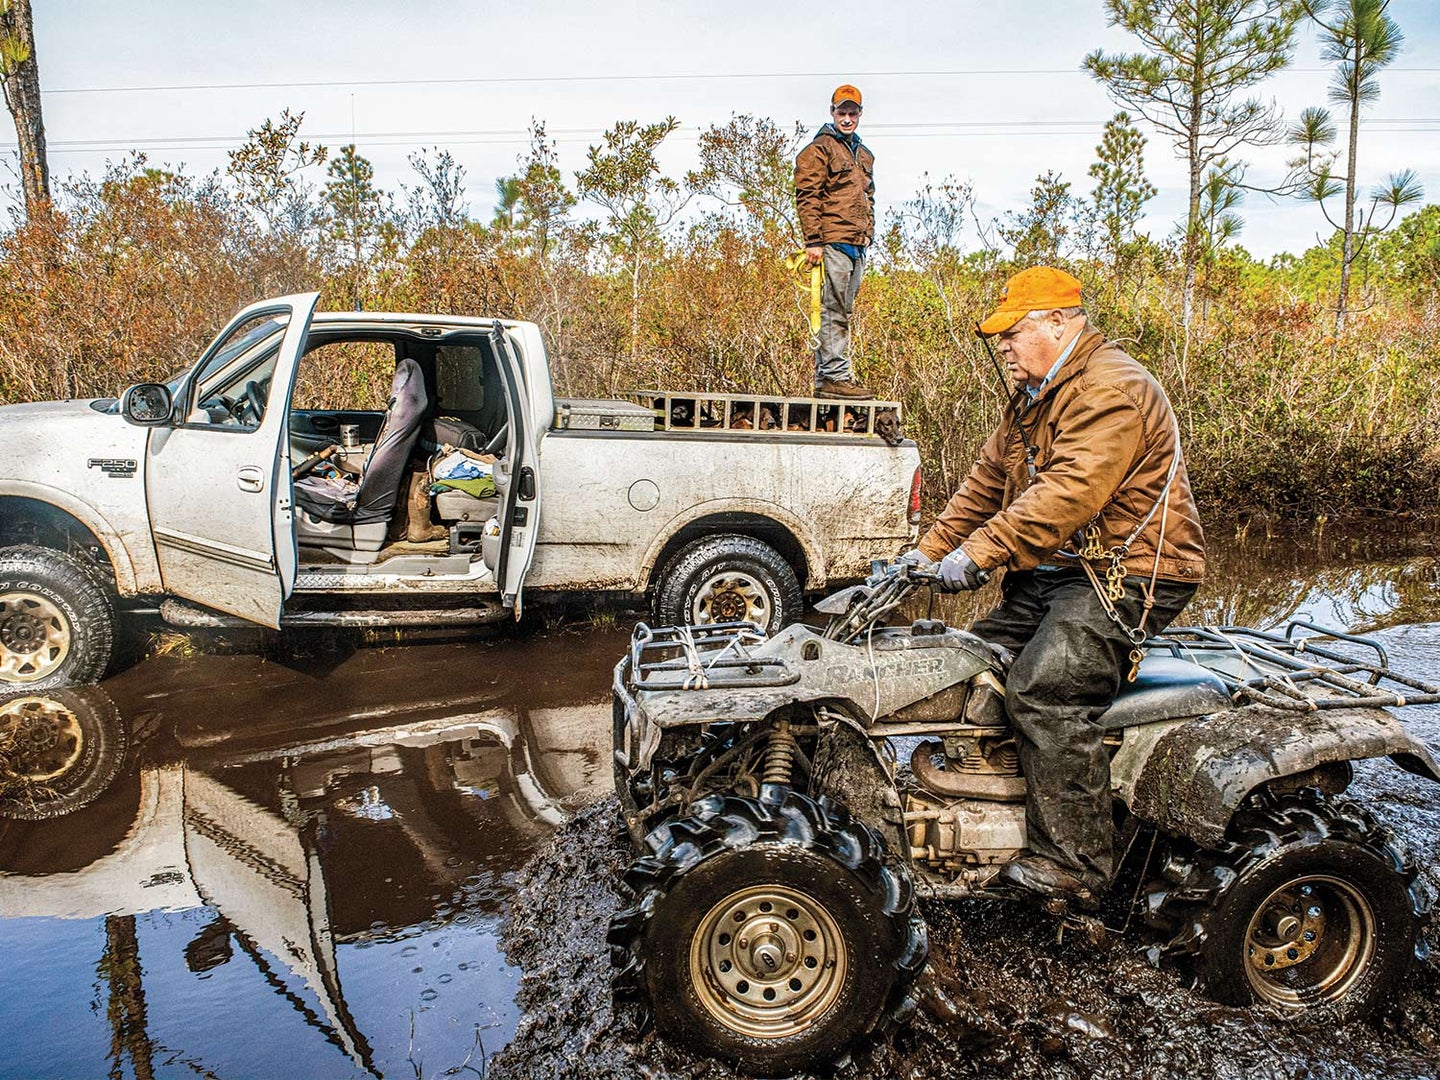 A hunter drives a four-wheeled ATV through the muddy water while one stands on top of a dog cage in the bed of a truck in the muddy water.